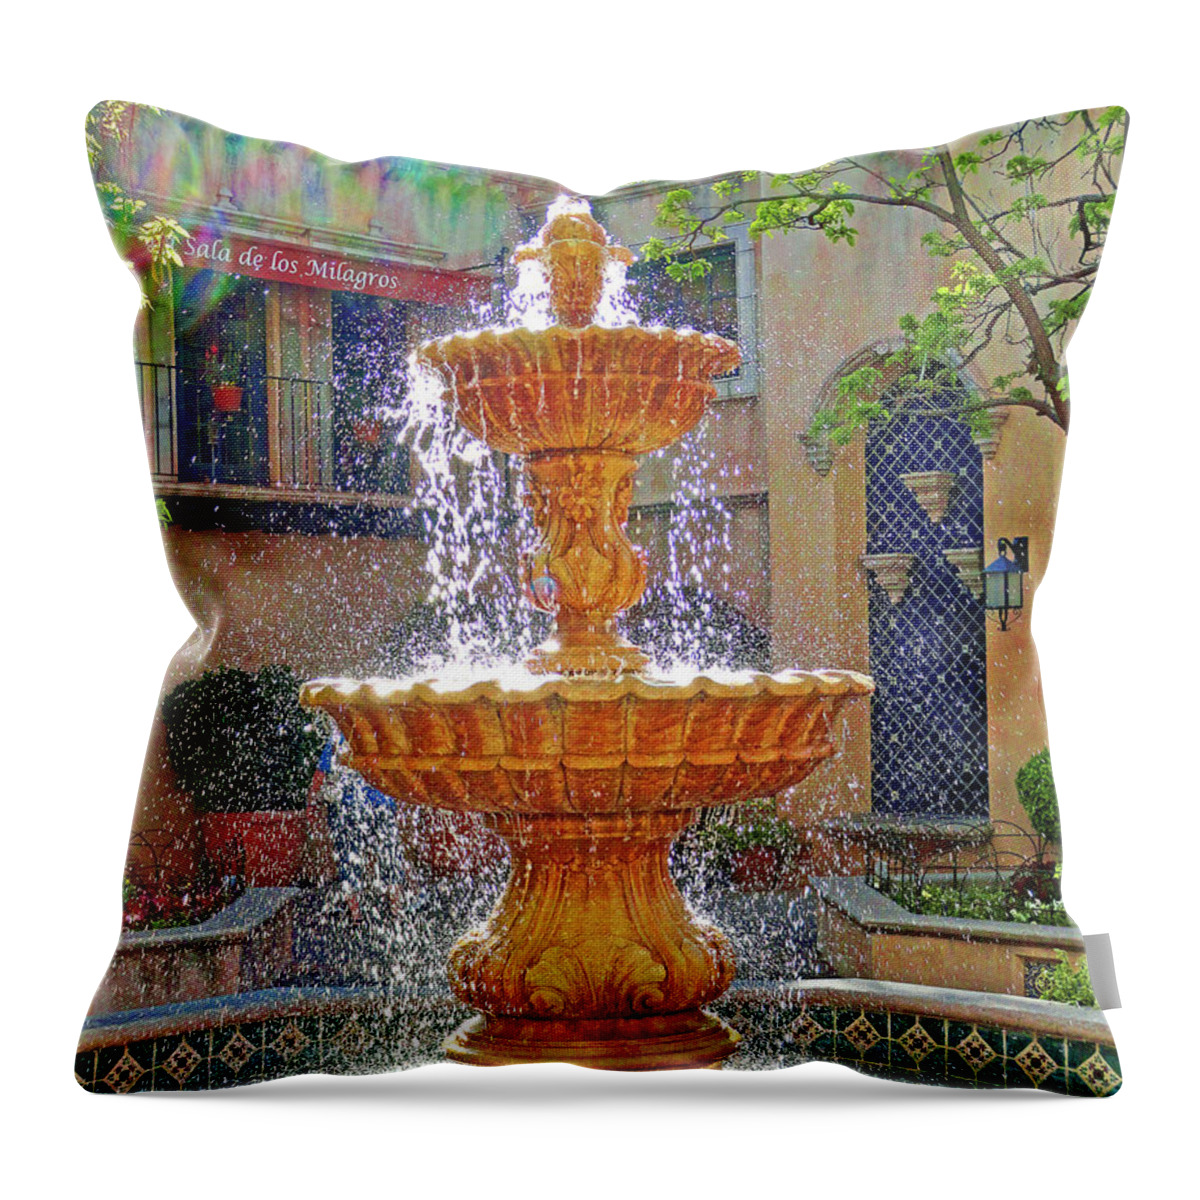 Tlaquepaque Throw Pillow featuring the photograph Tlaquepaque Fountain in Sunlight by Robert Meyers-Lussier